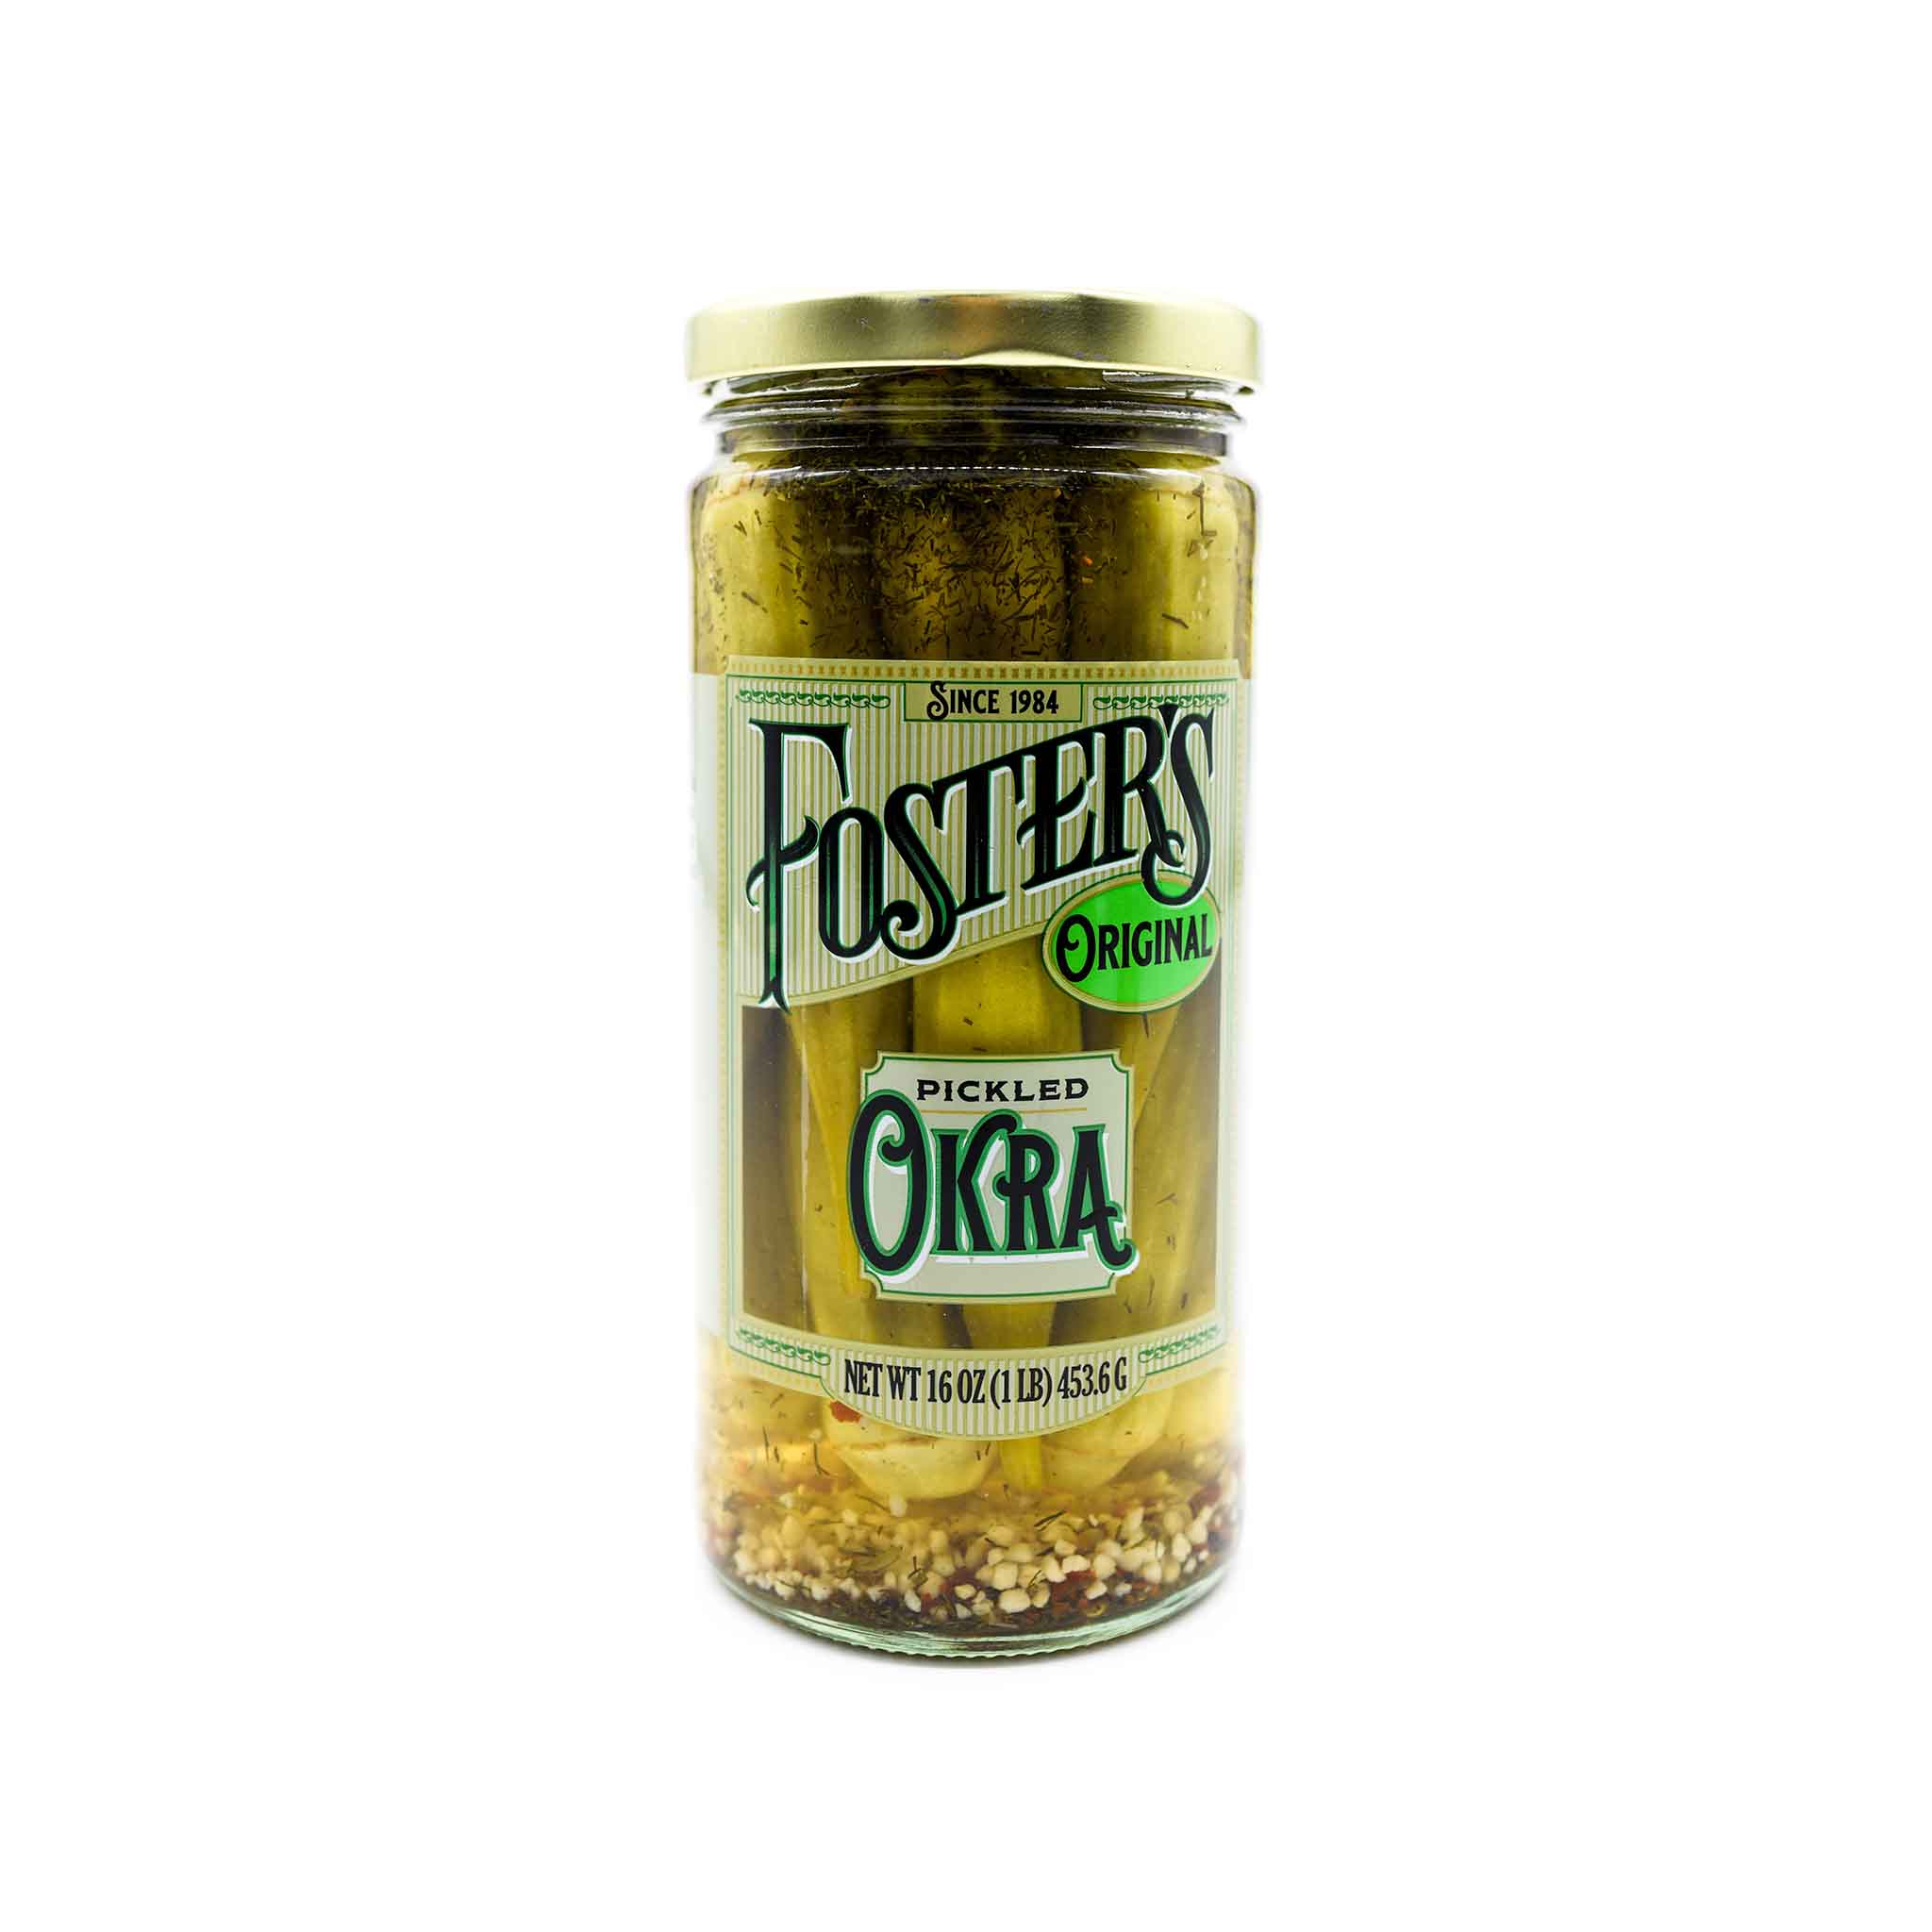 FOSTERS PICKLED OKRA 16oz